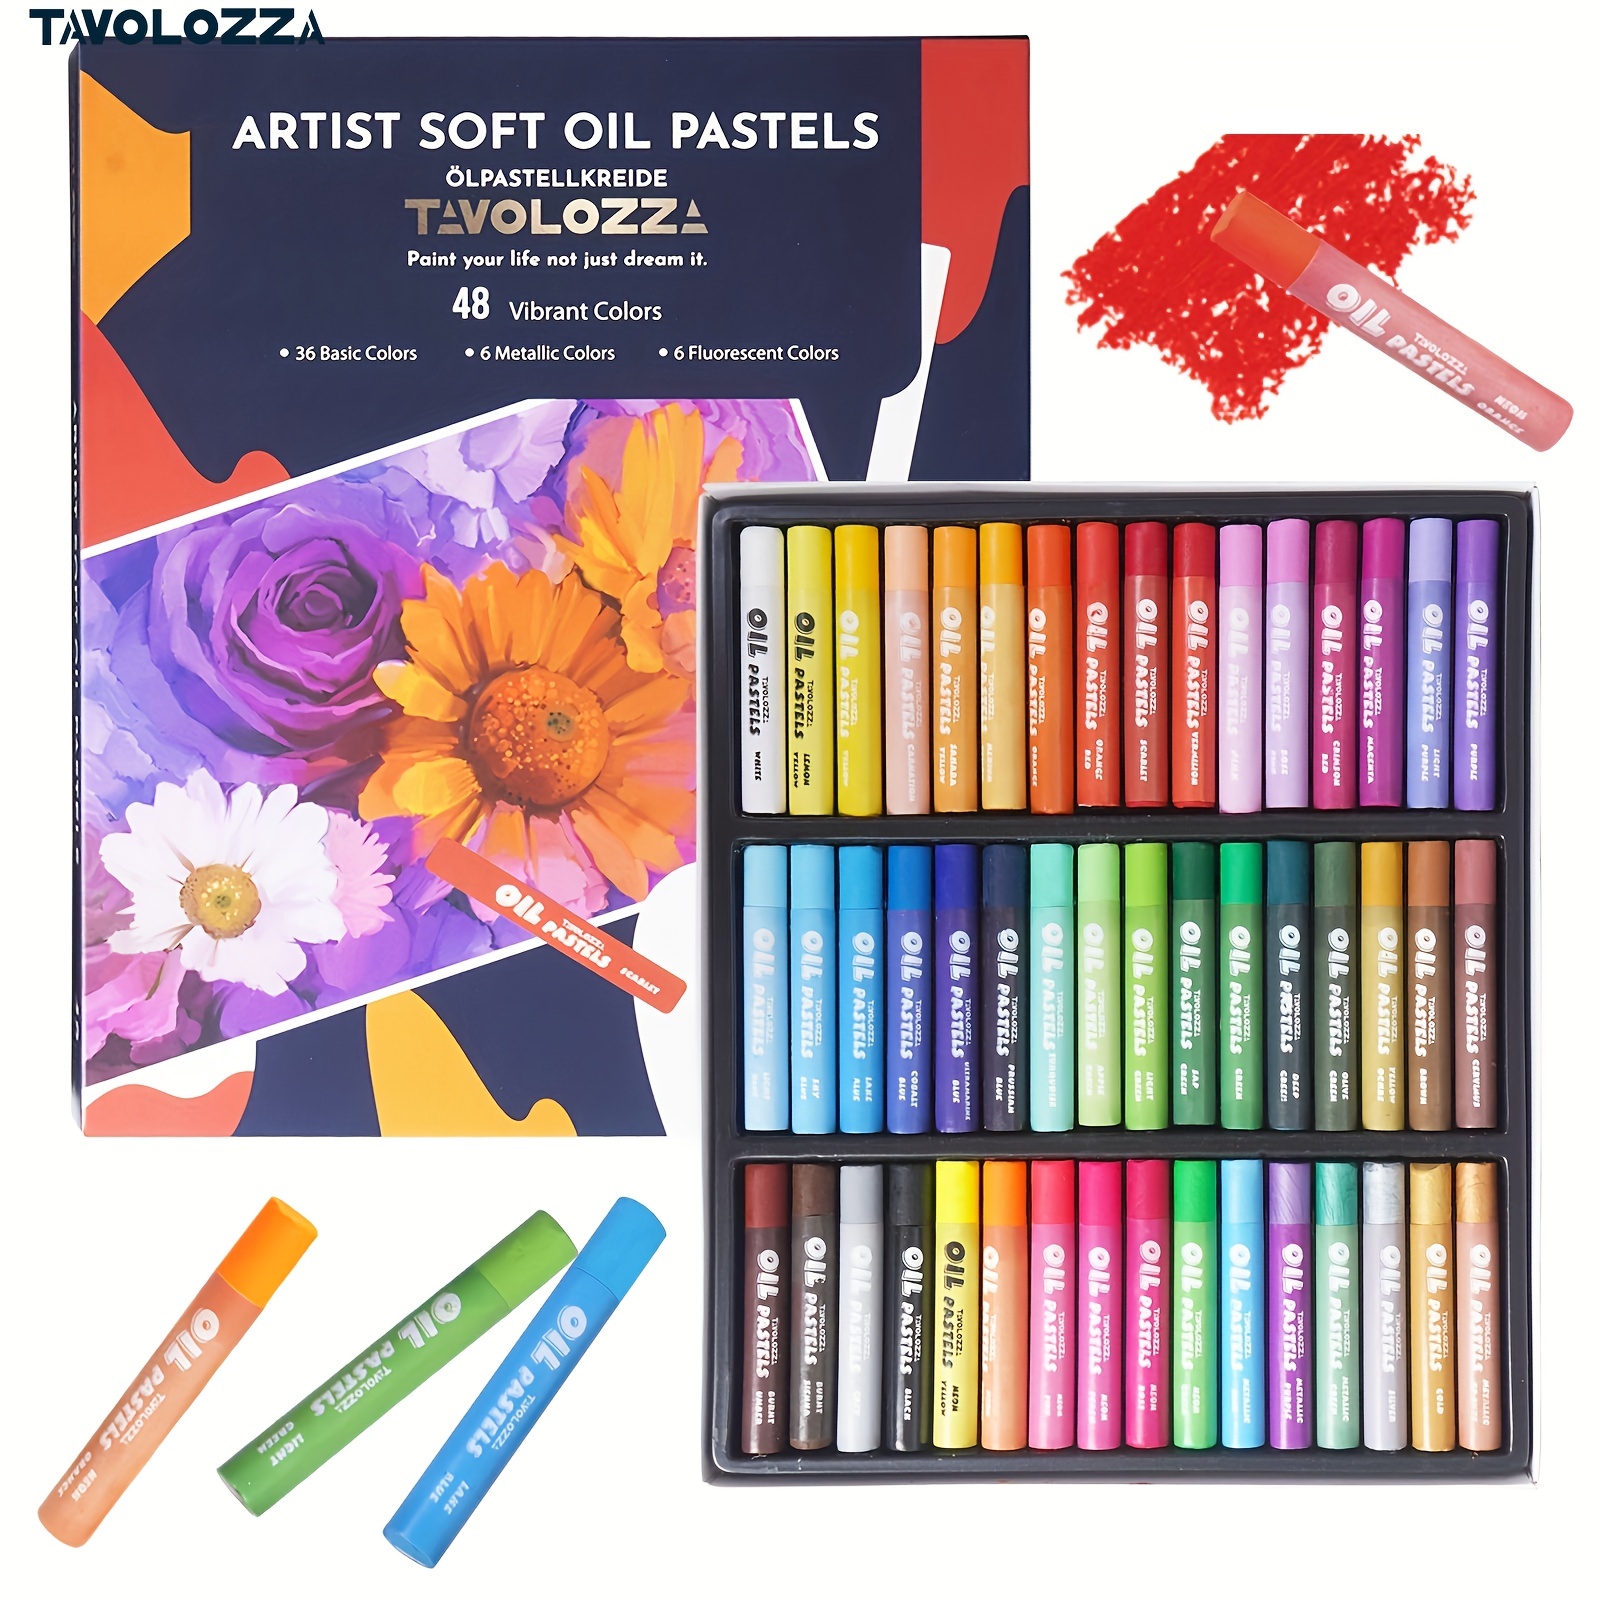 Ooly, Pastel Hues Colored Pencils, Vivid and Beautiful Pastel Pencil Set  for Kids and Adults, Drawing and Coloring Art Supplies, Unique Pastels for